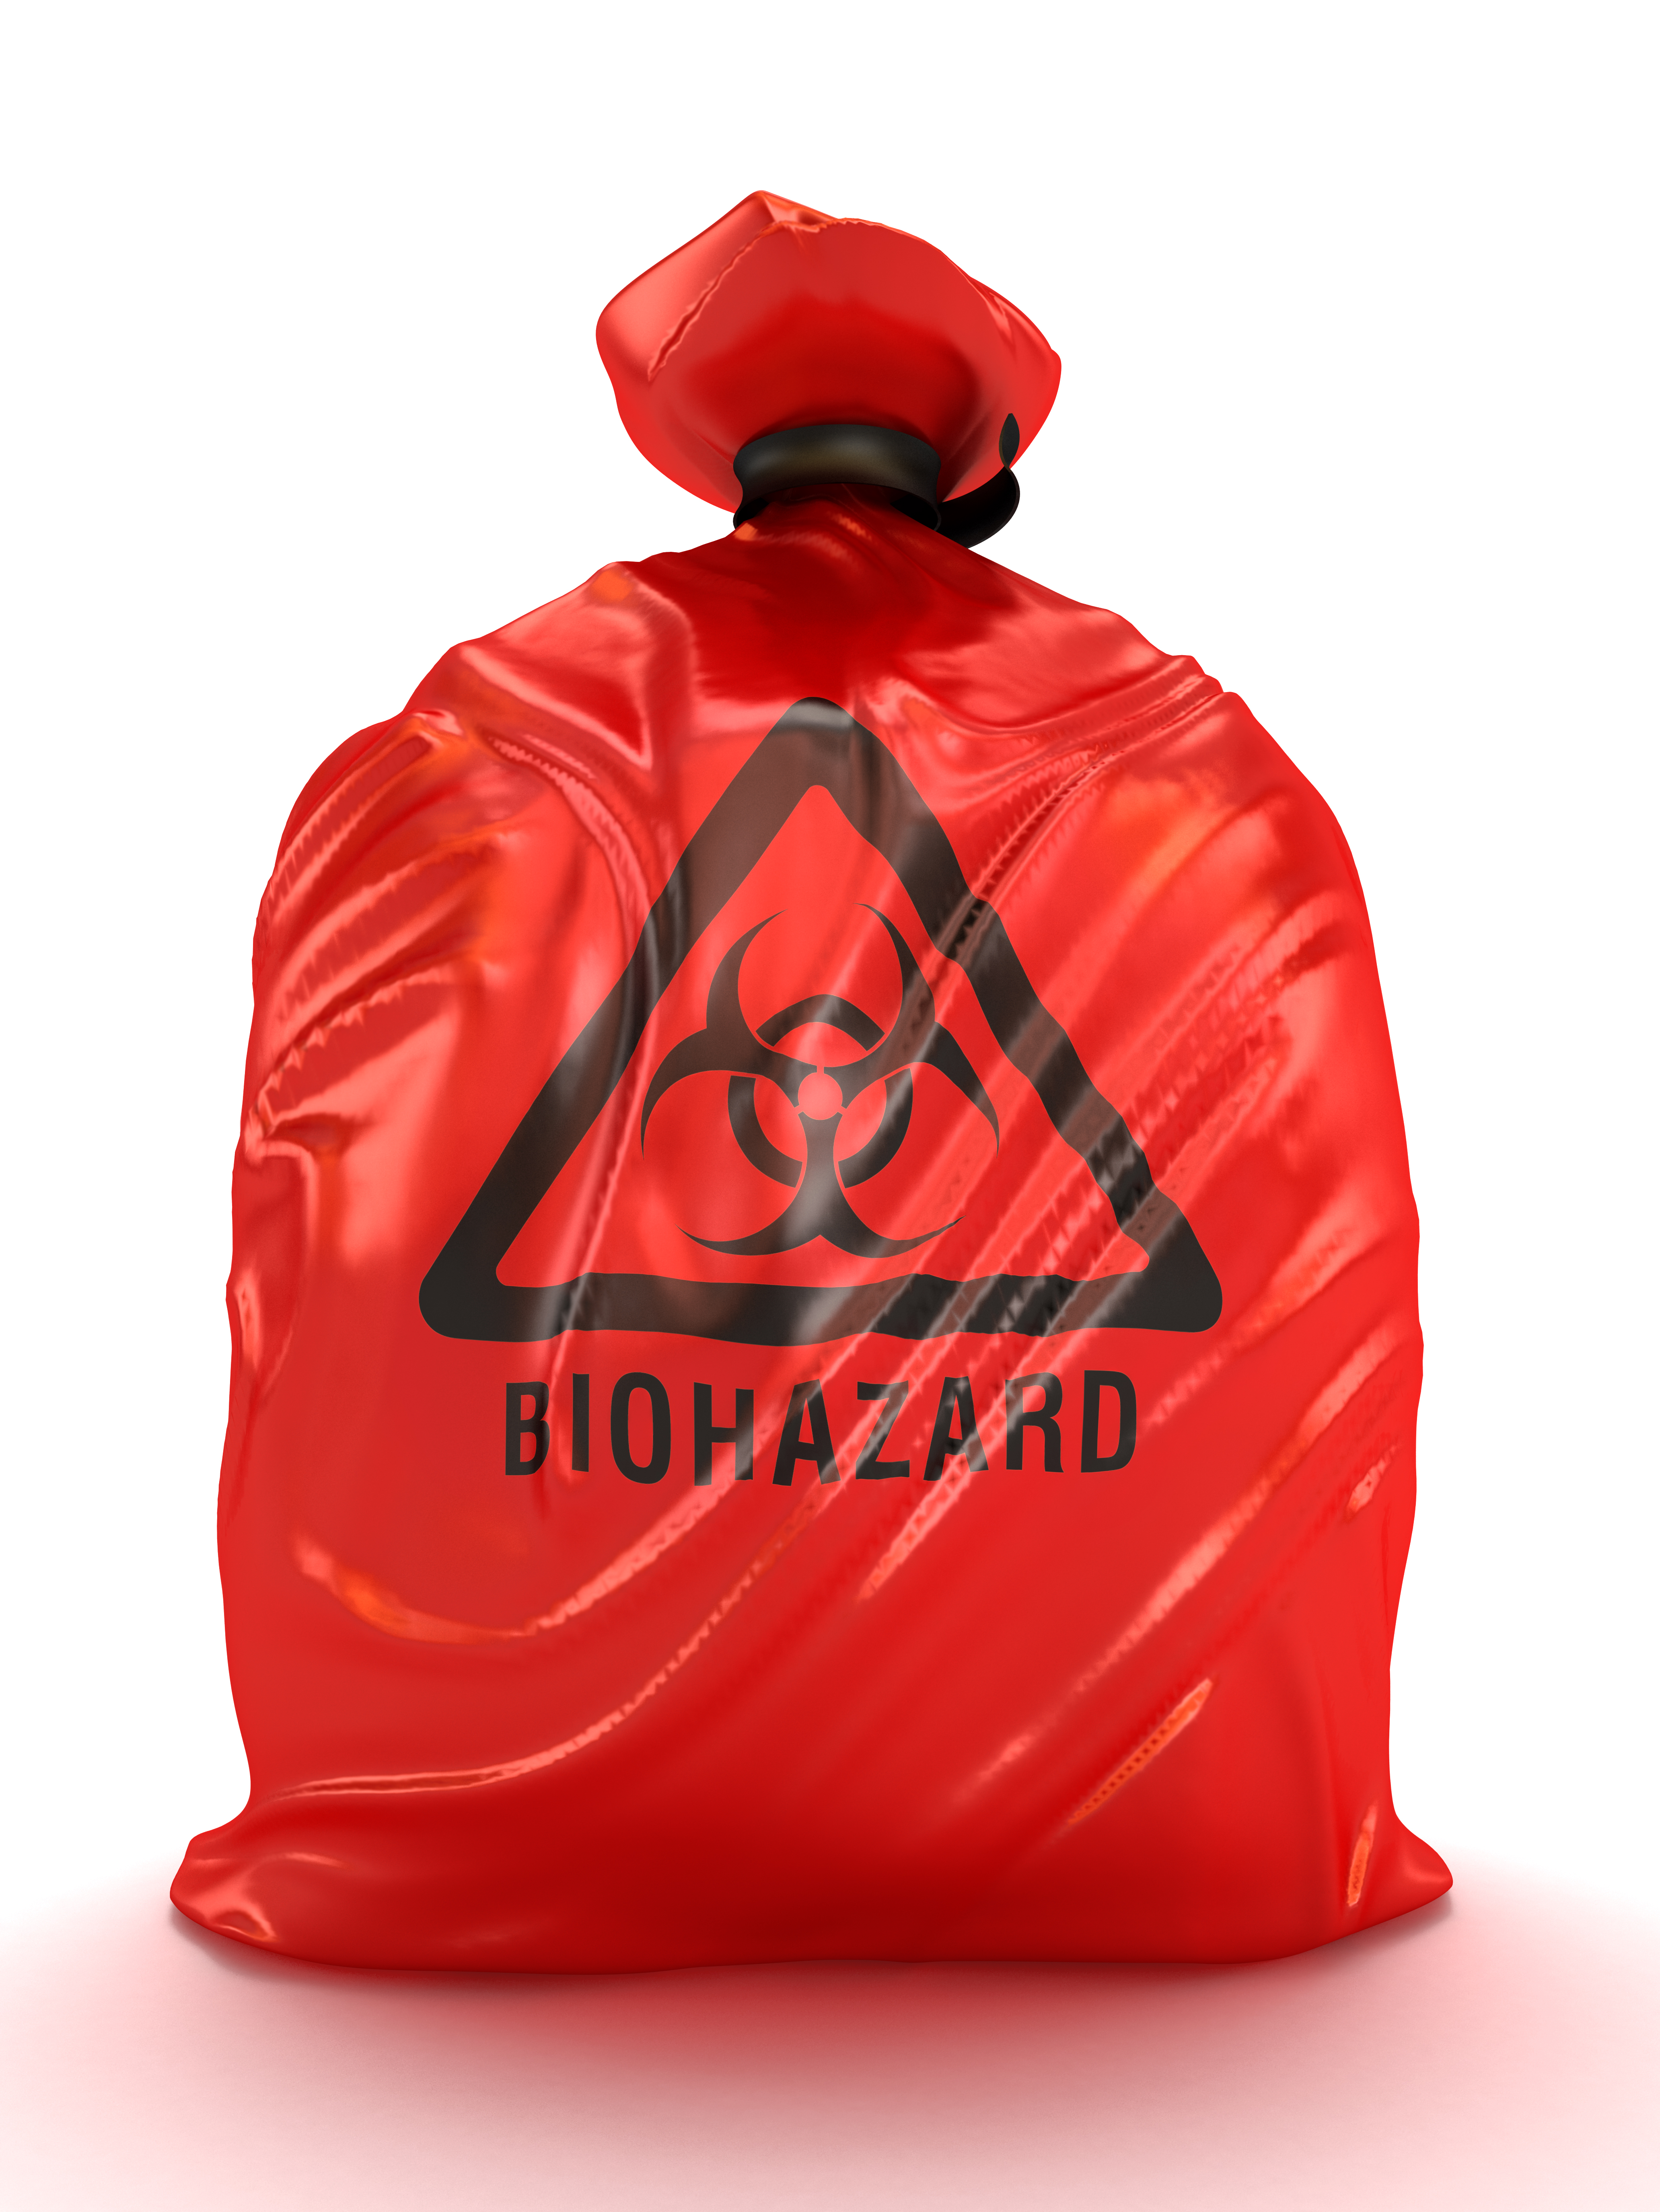 Clinical Waste Bags - The Complete Guide | What's the difference?